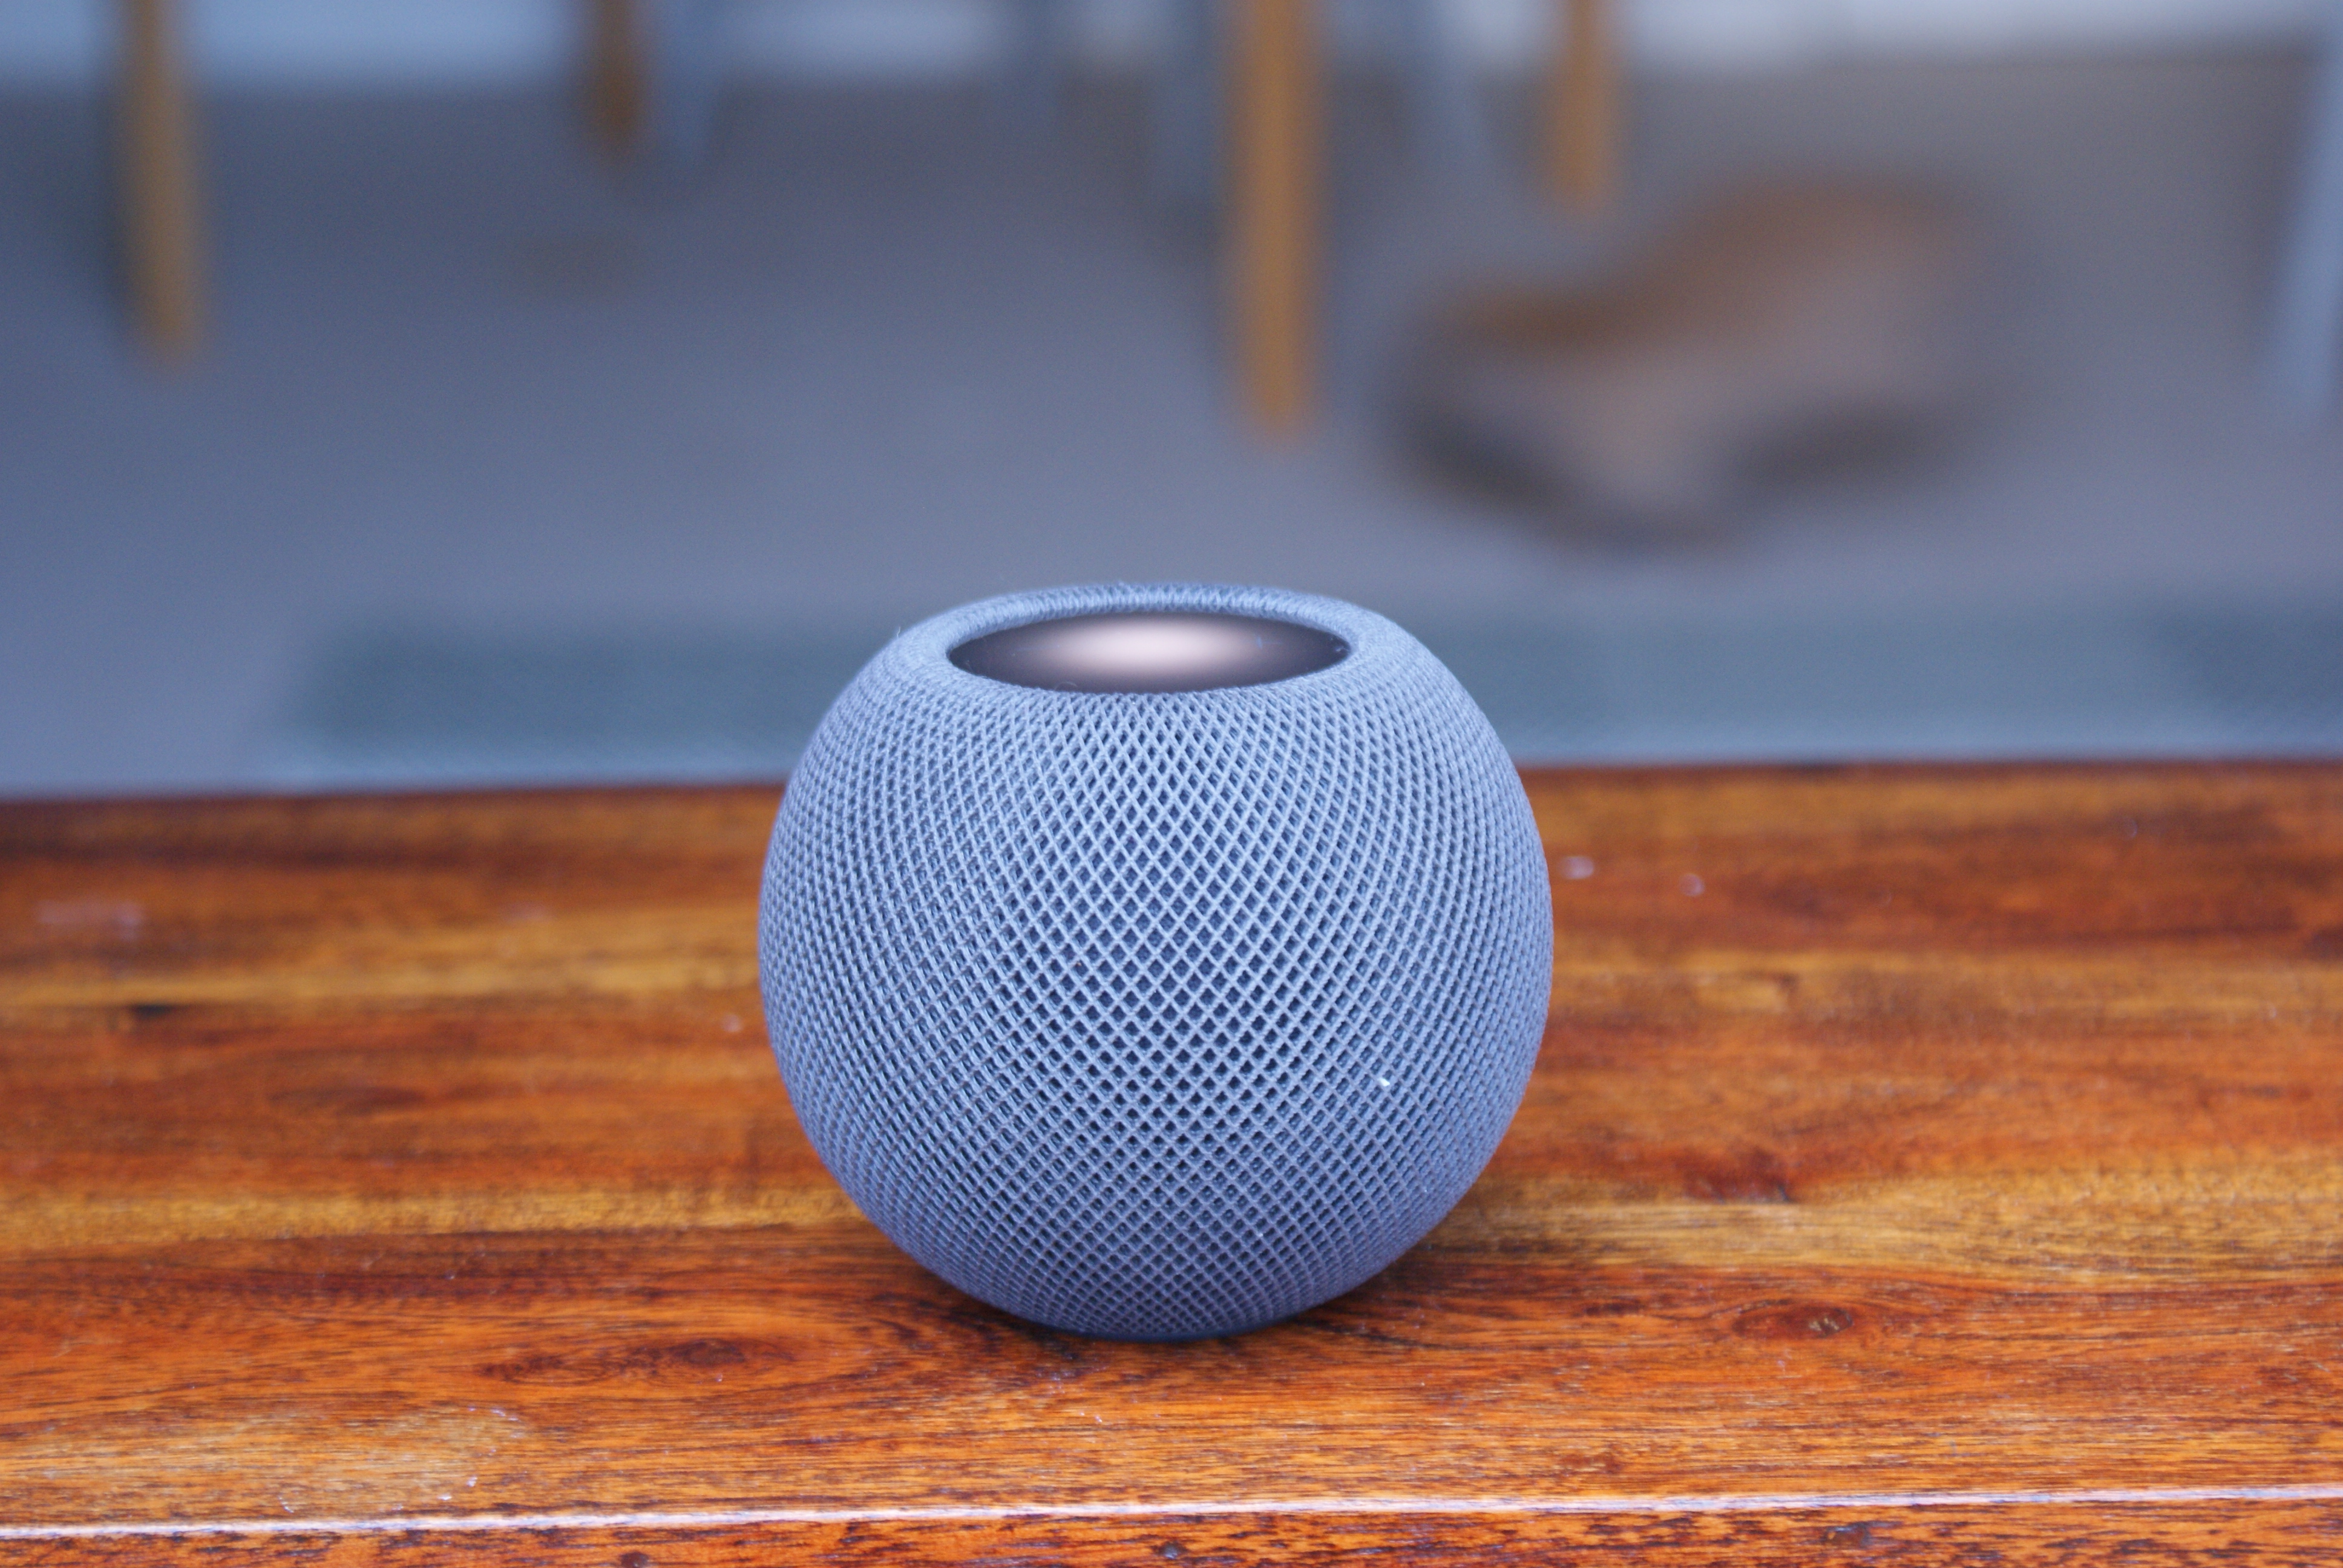 Apple HomePod Mini review: incredible sound for an impressive price